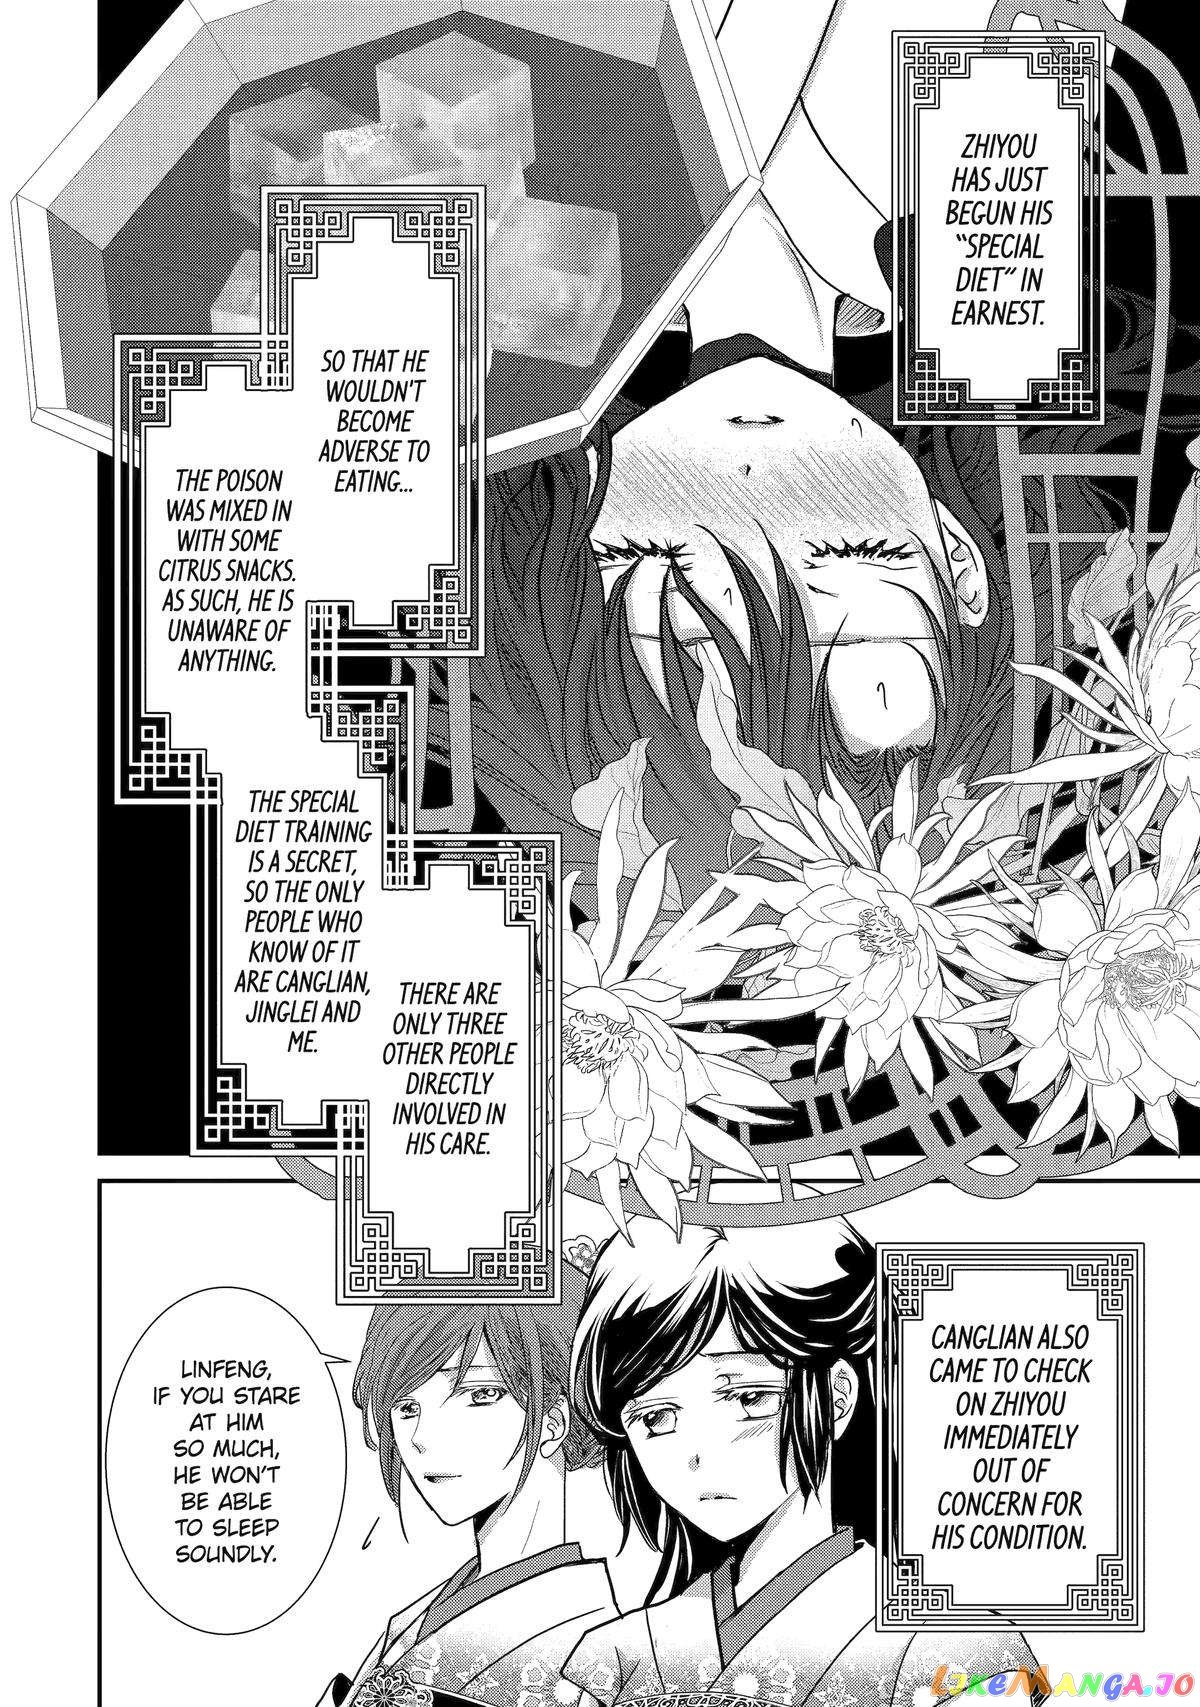 The Emperor's Caretaker: I'm Too Happy Living as a Lady-in-Waiting to Leave the Palace chapter 12 - page 4